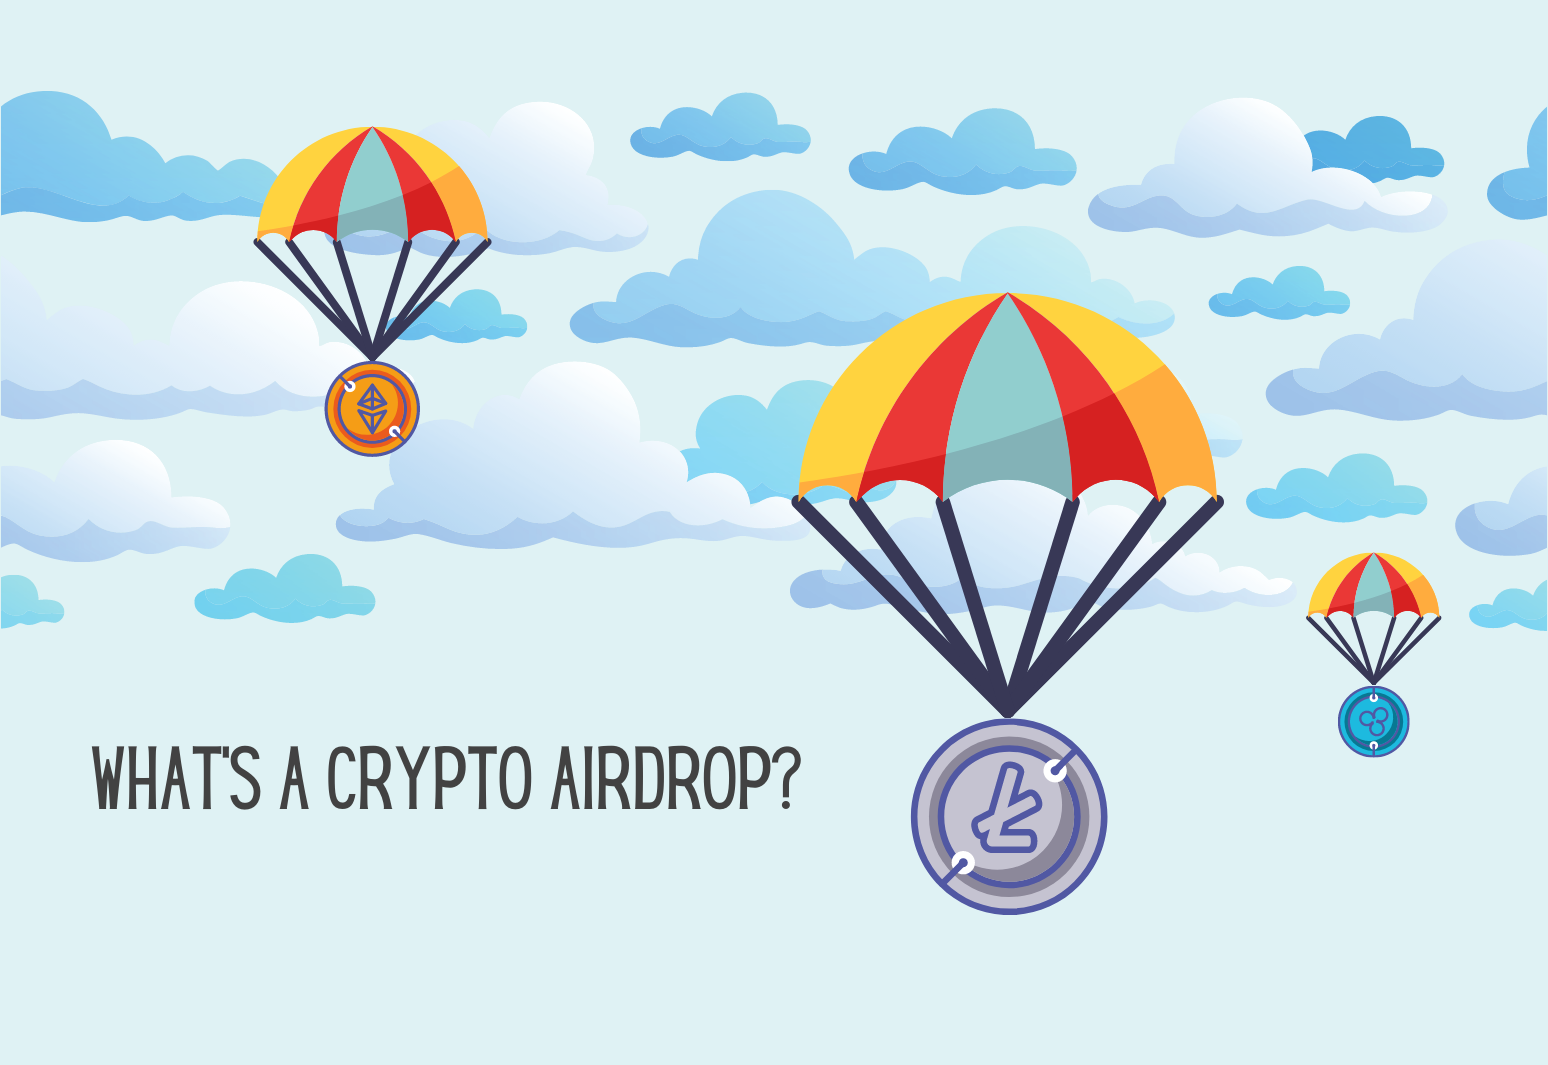 how does crypto airdrop work